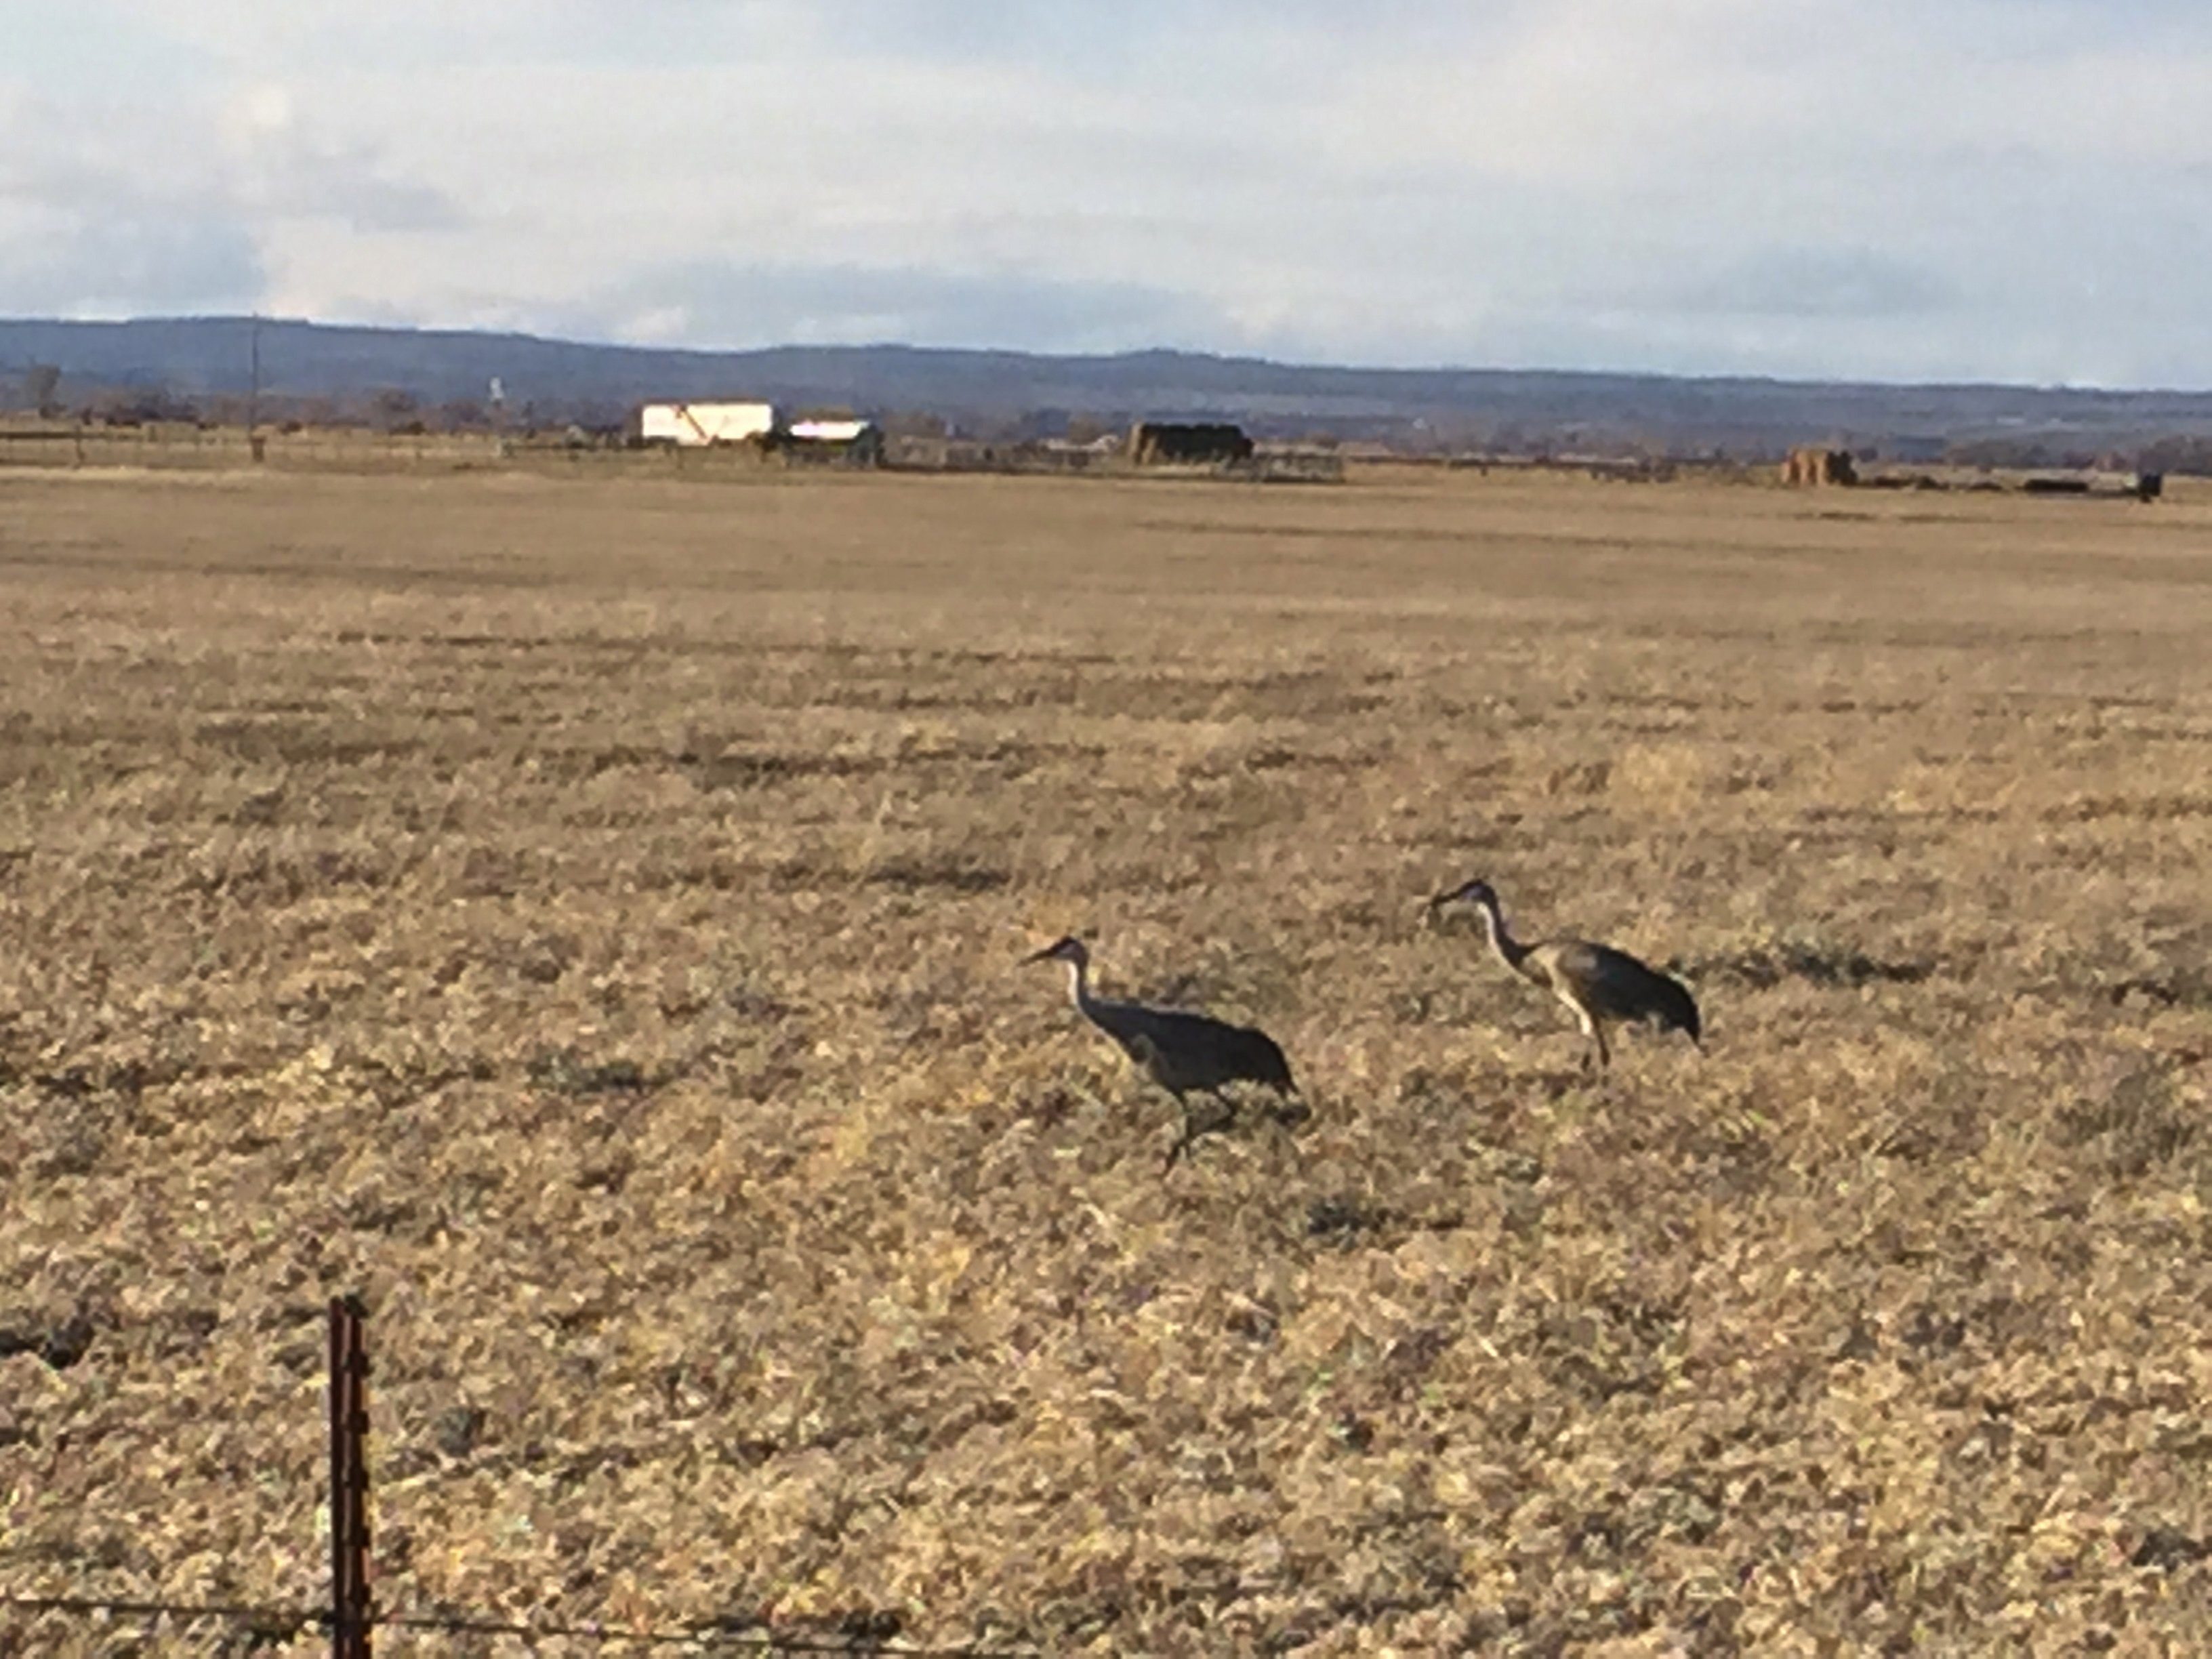 Sandhill cranes, which winter farther south in California, have arrived this spring at the Malheur National Wildlife Refuge, Ore., and nearby private lands, such as this pasture where the long-legged birds forage for food.